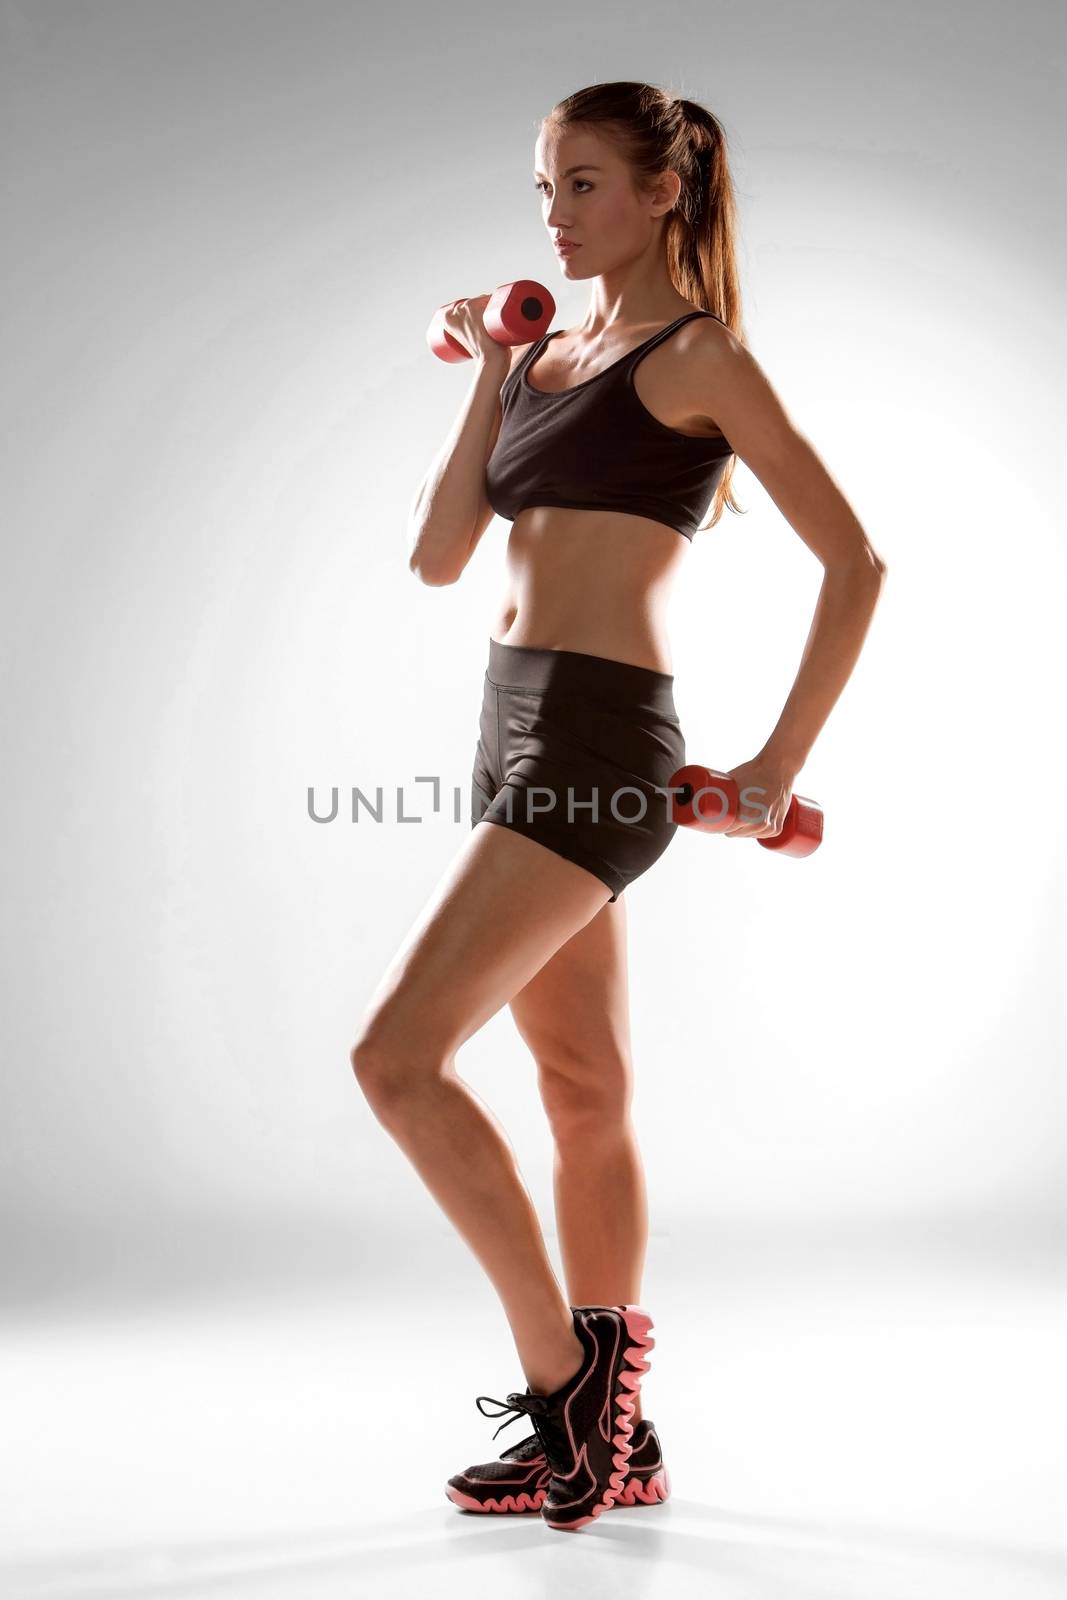 Sporty woman doing aerobic exercise with red dumbbells on grey background